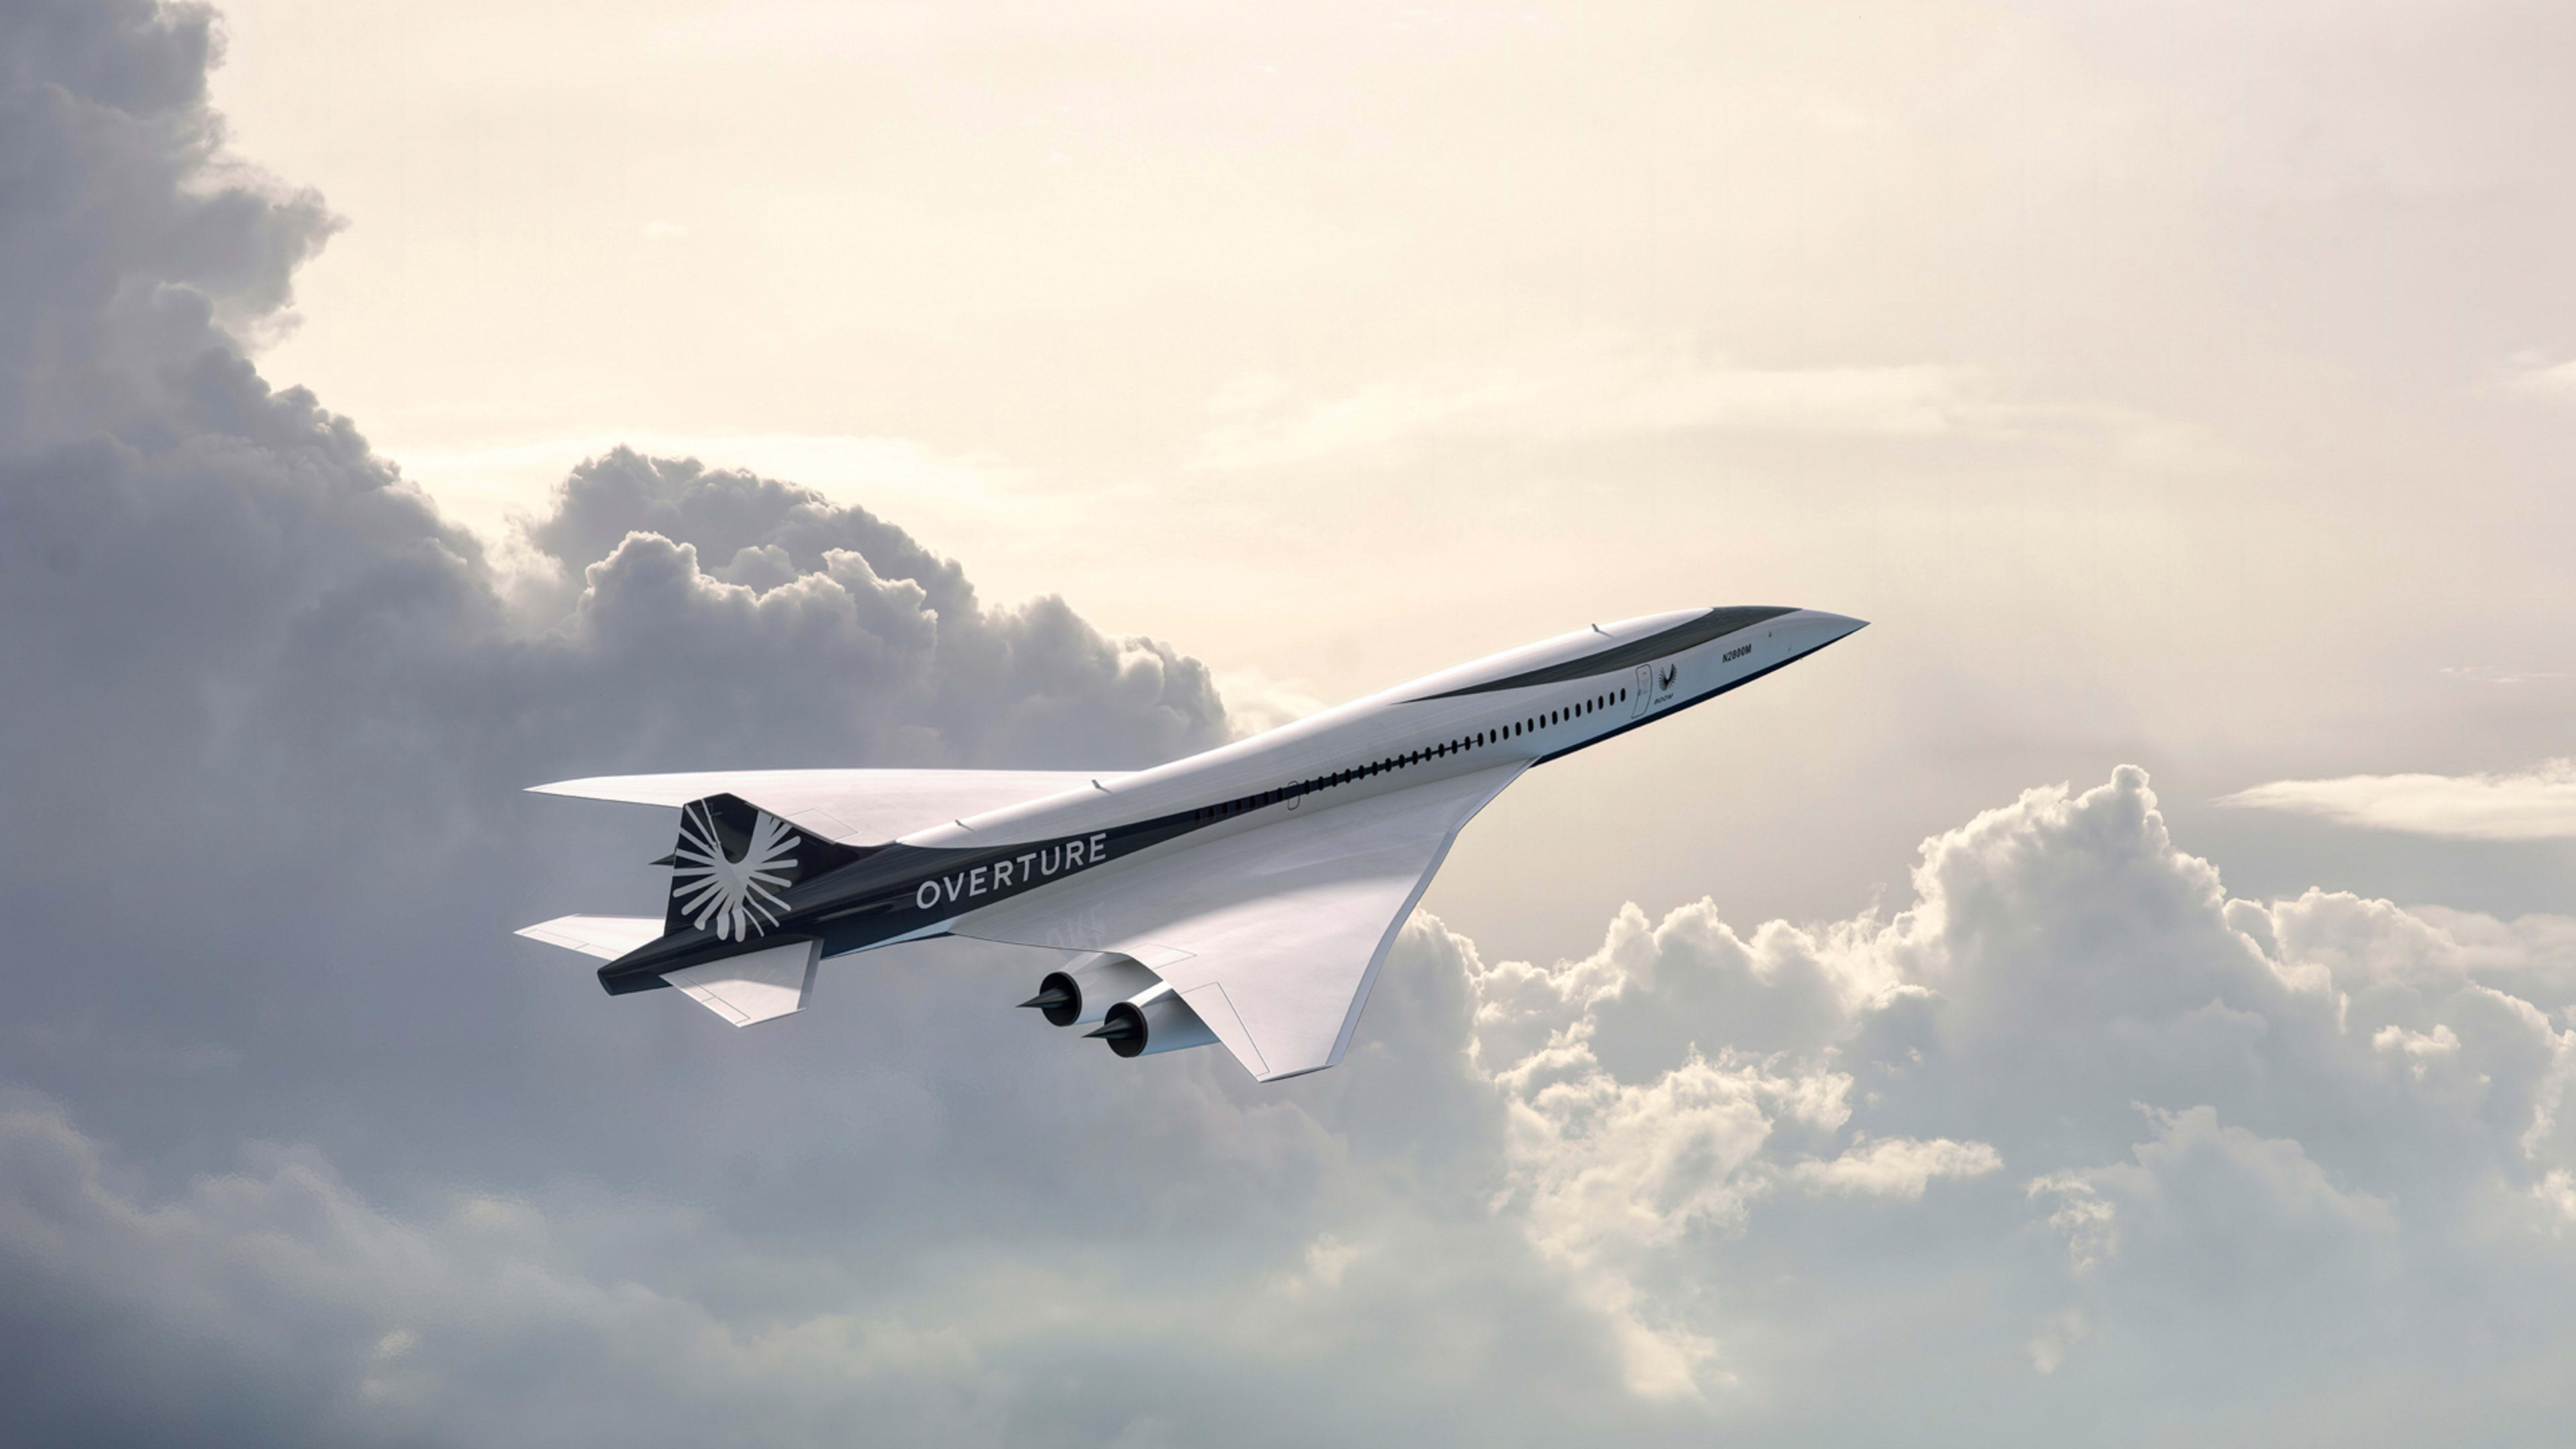 Boom Supersonic reveals a new design for its ultrafast passenger jet—with more engines